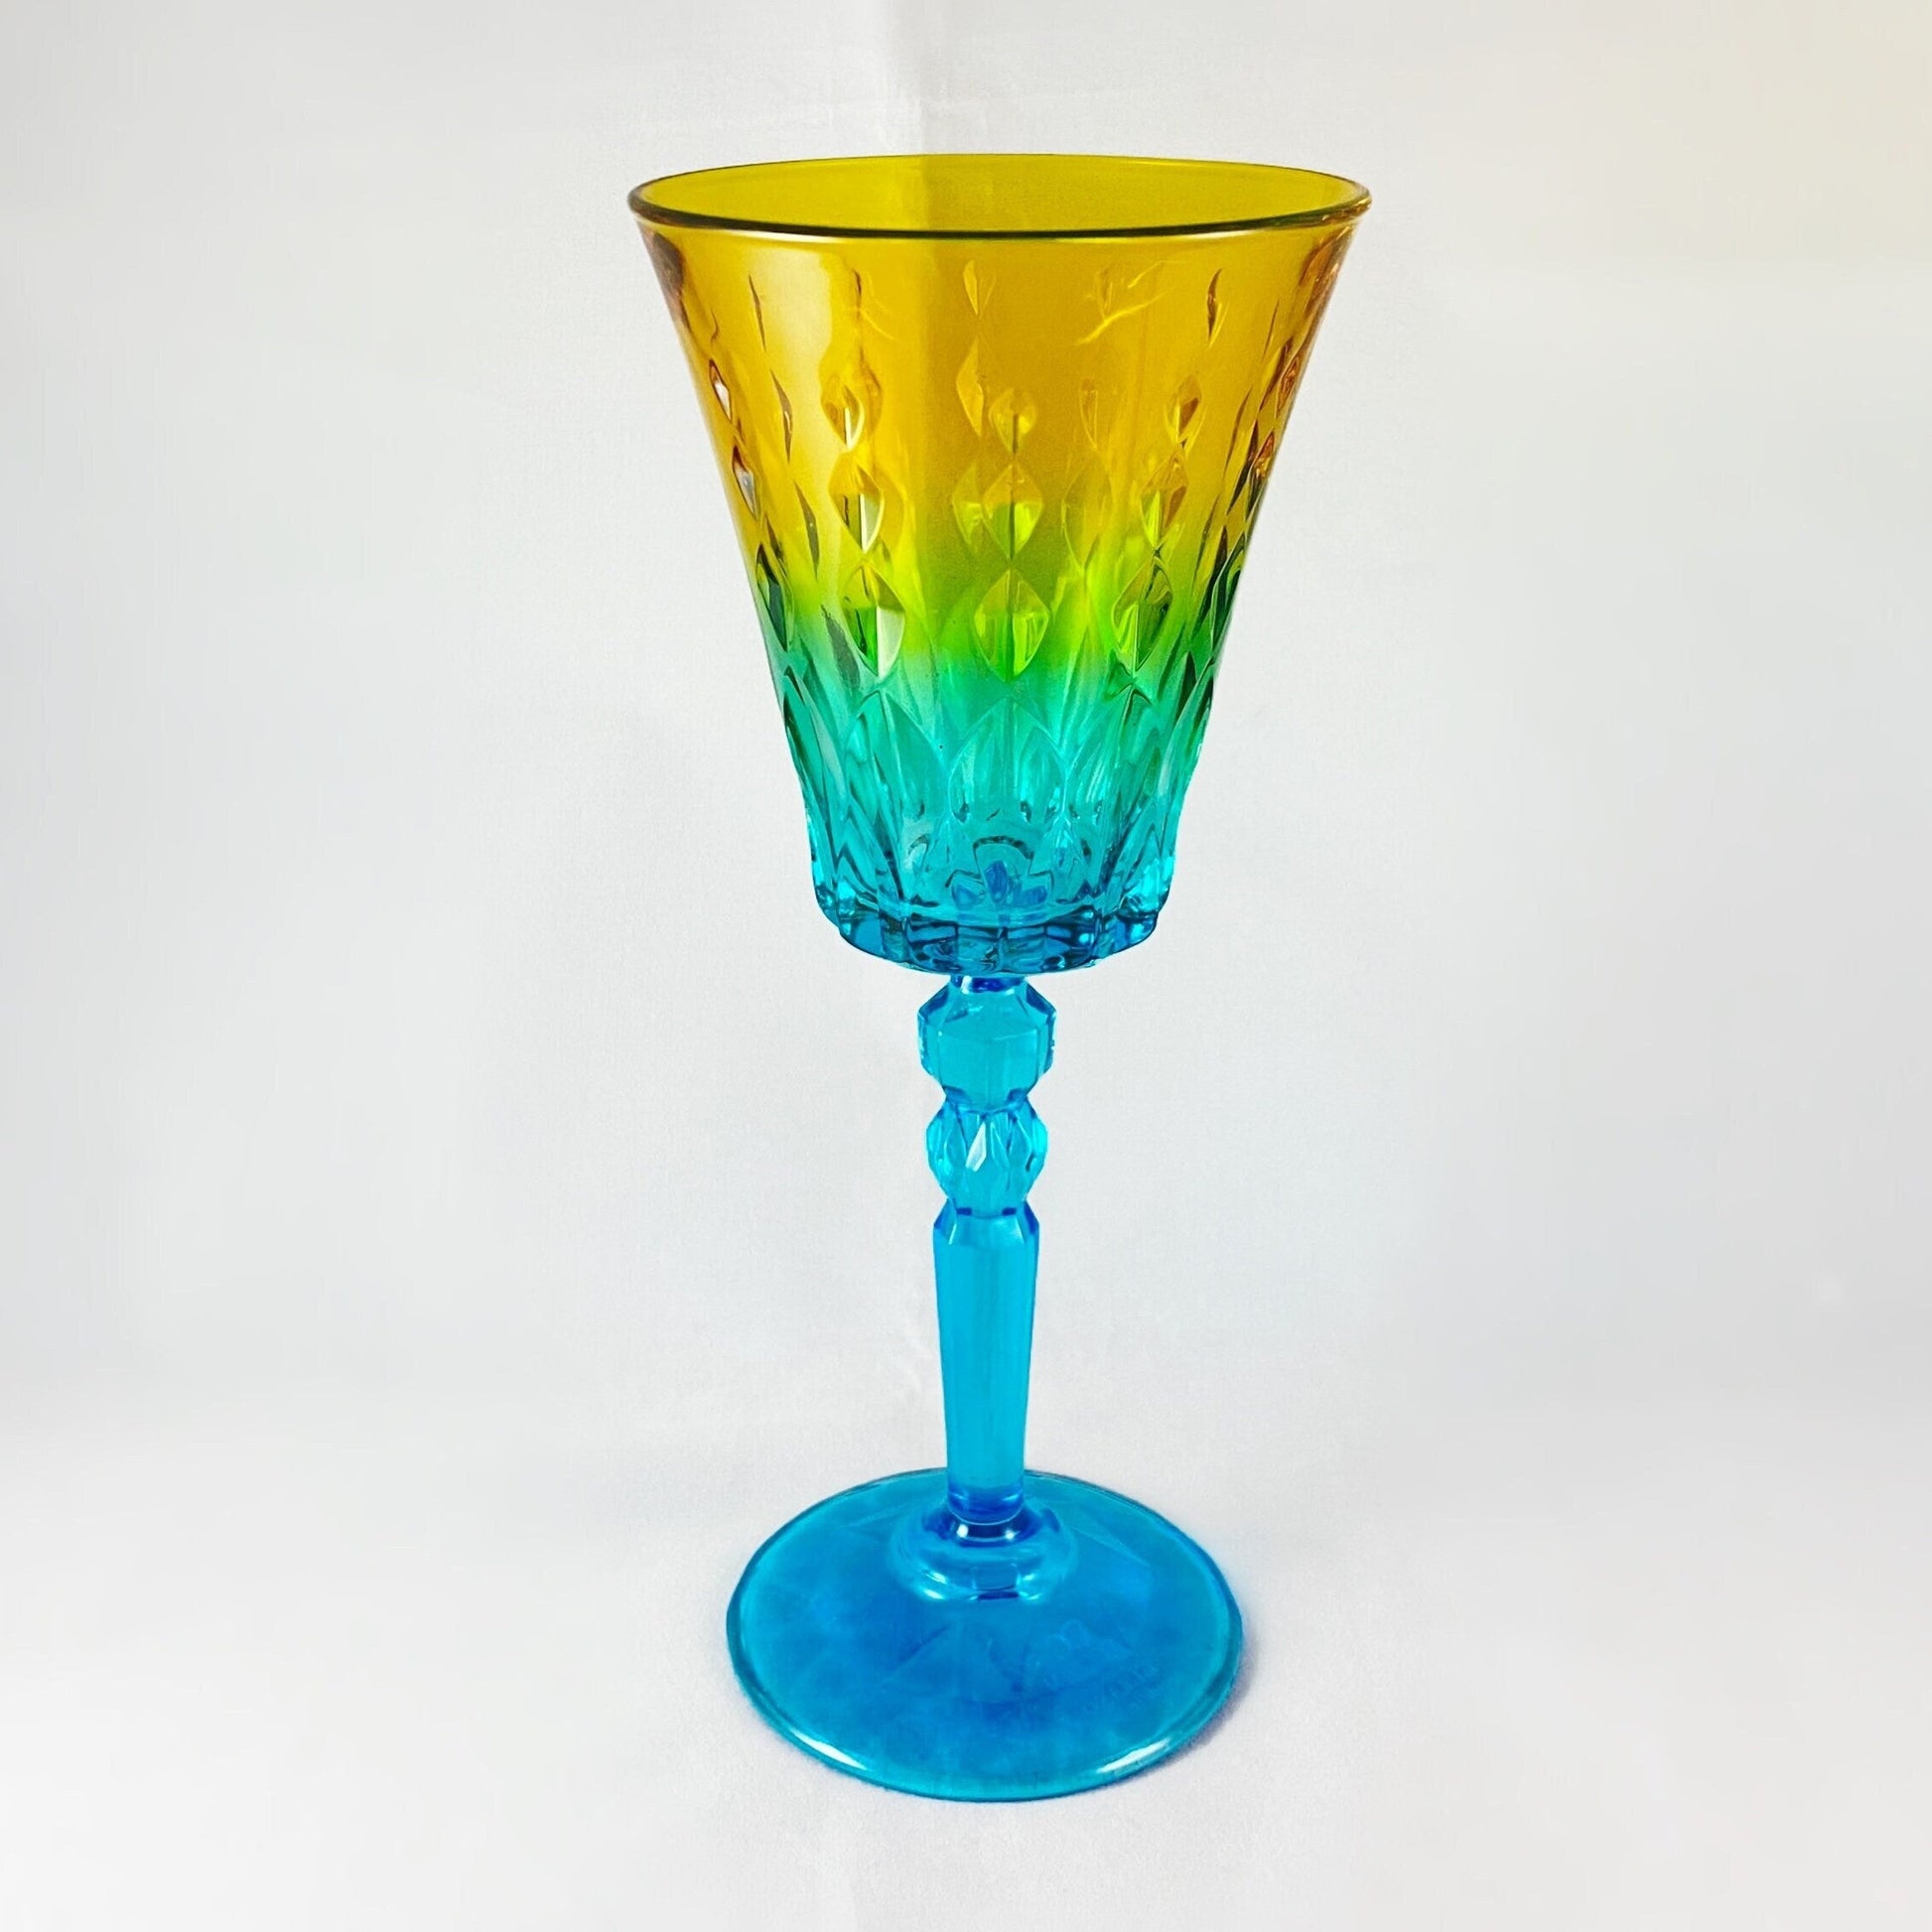 Yellow/Green/Blue Ombre Gradient and Diamond Pattern Venetian Glass Wine Glass - Handmade in Italy, Colorful Murano Glass